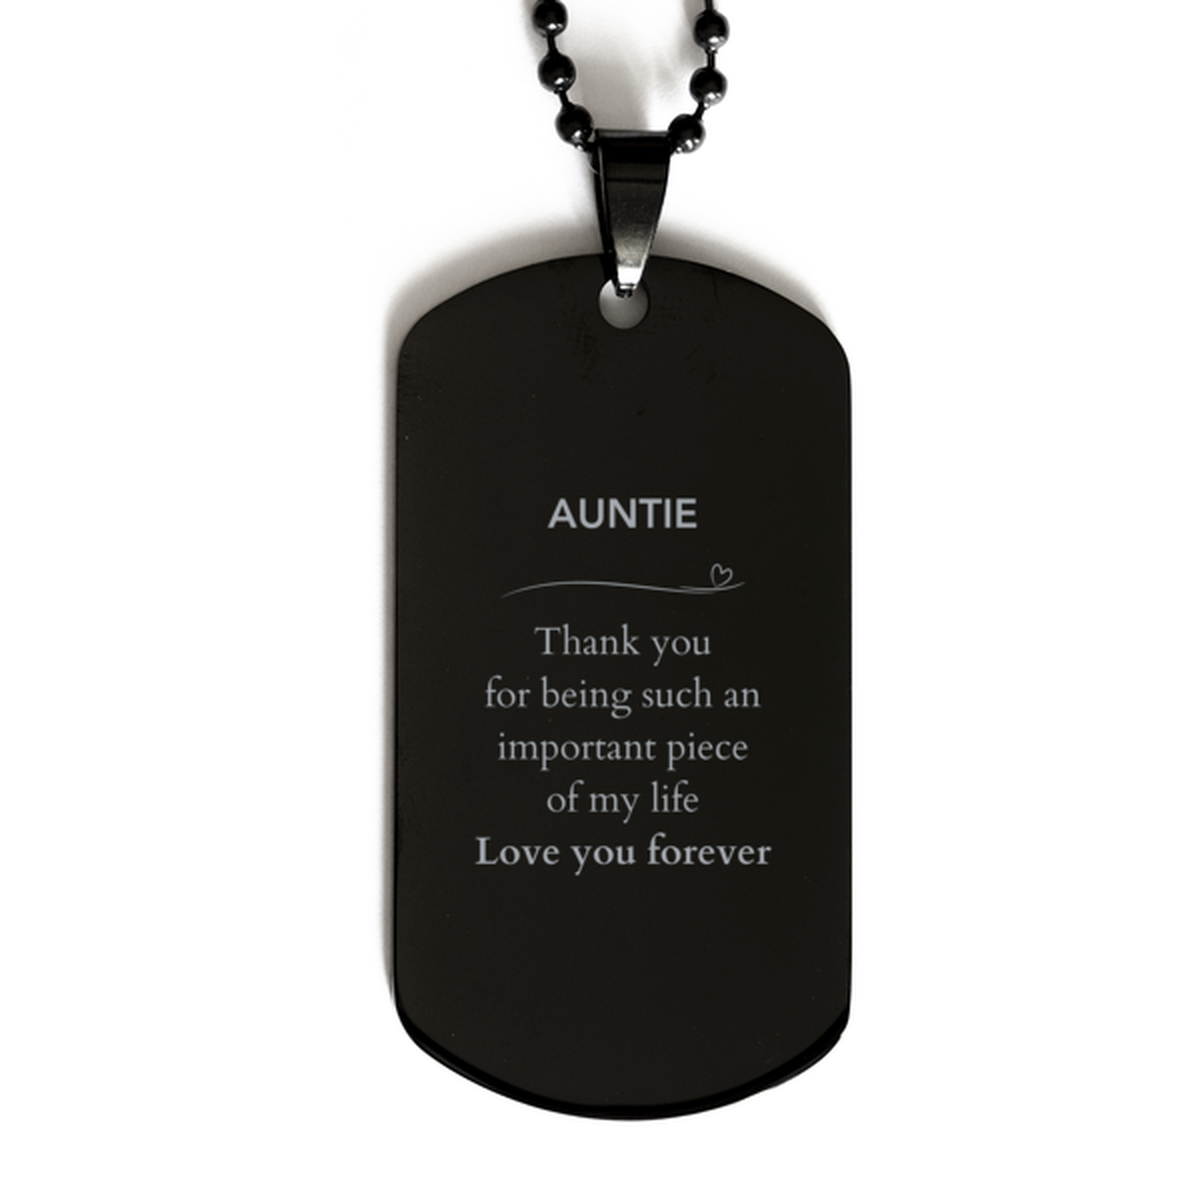 Appropriate Auntie Black Dog Tag Epic Birthday Gifts for Auntie Thank you for being such an important piece of my life Auntie Christmas Mothers Fathers Day